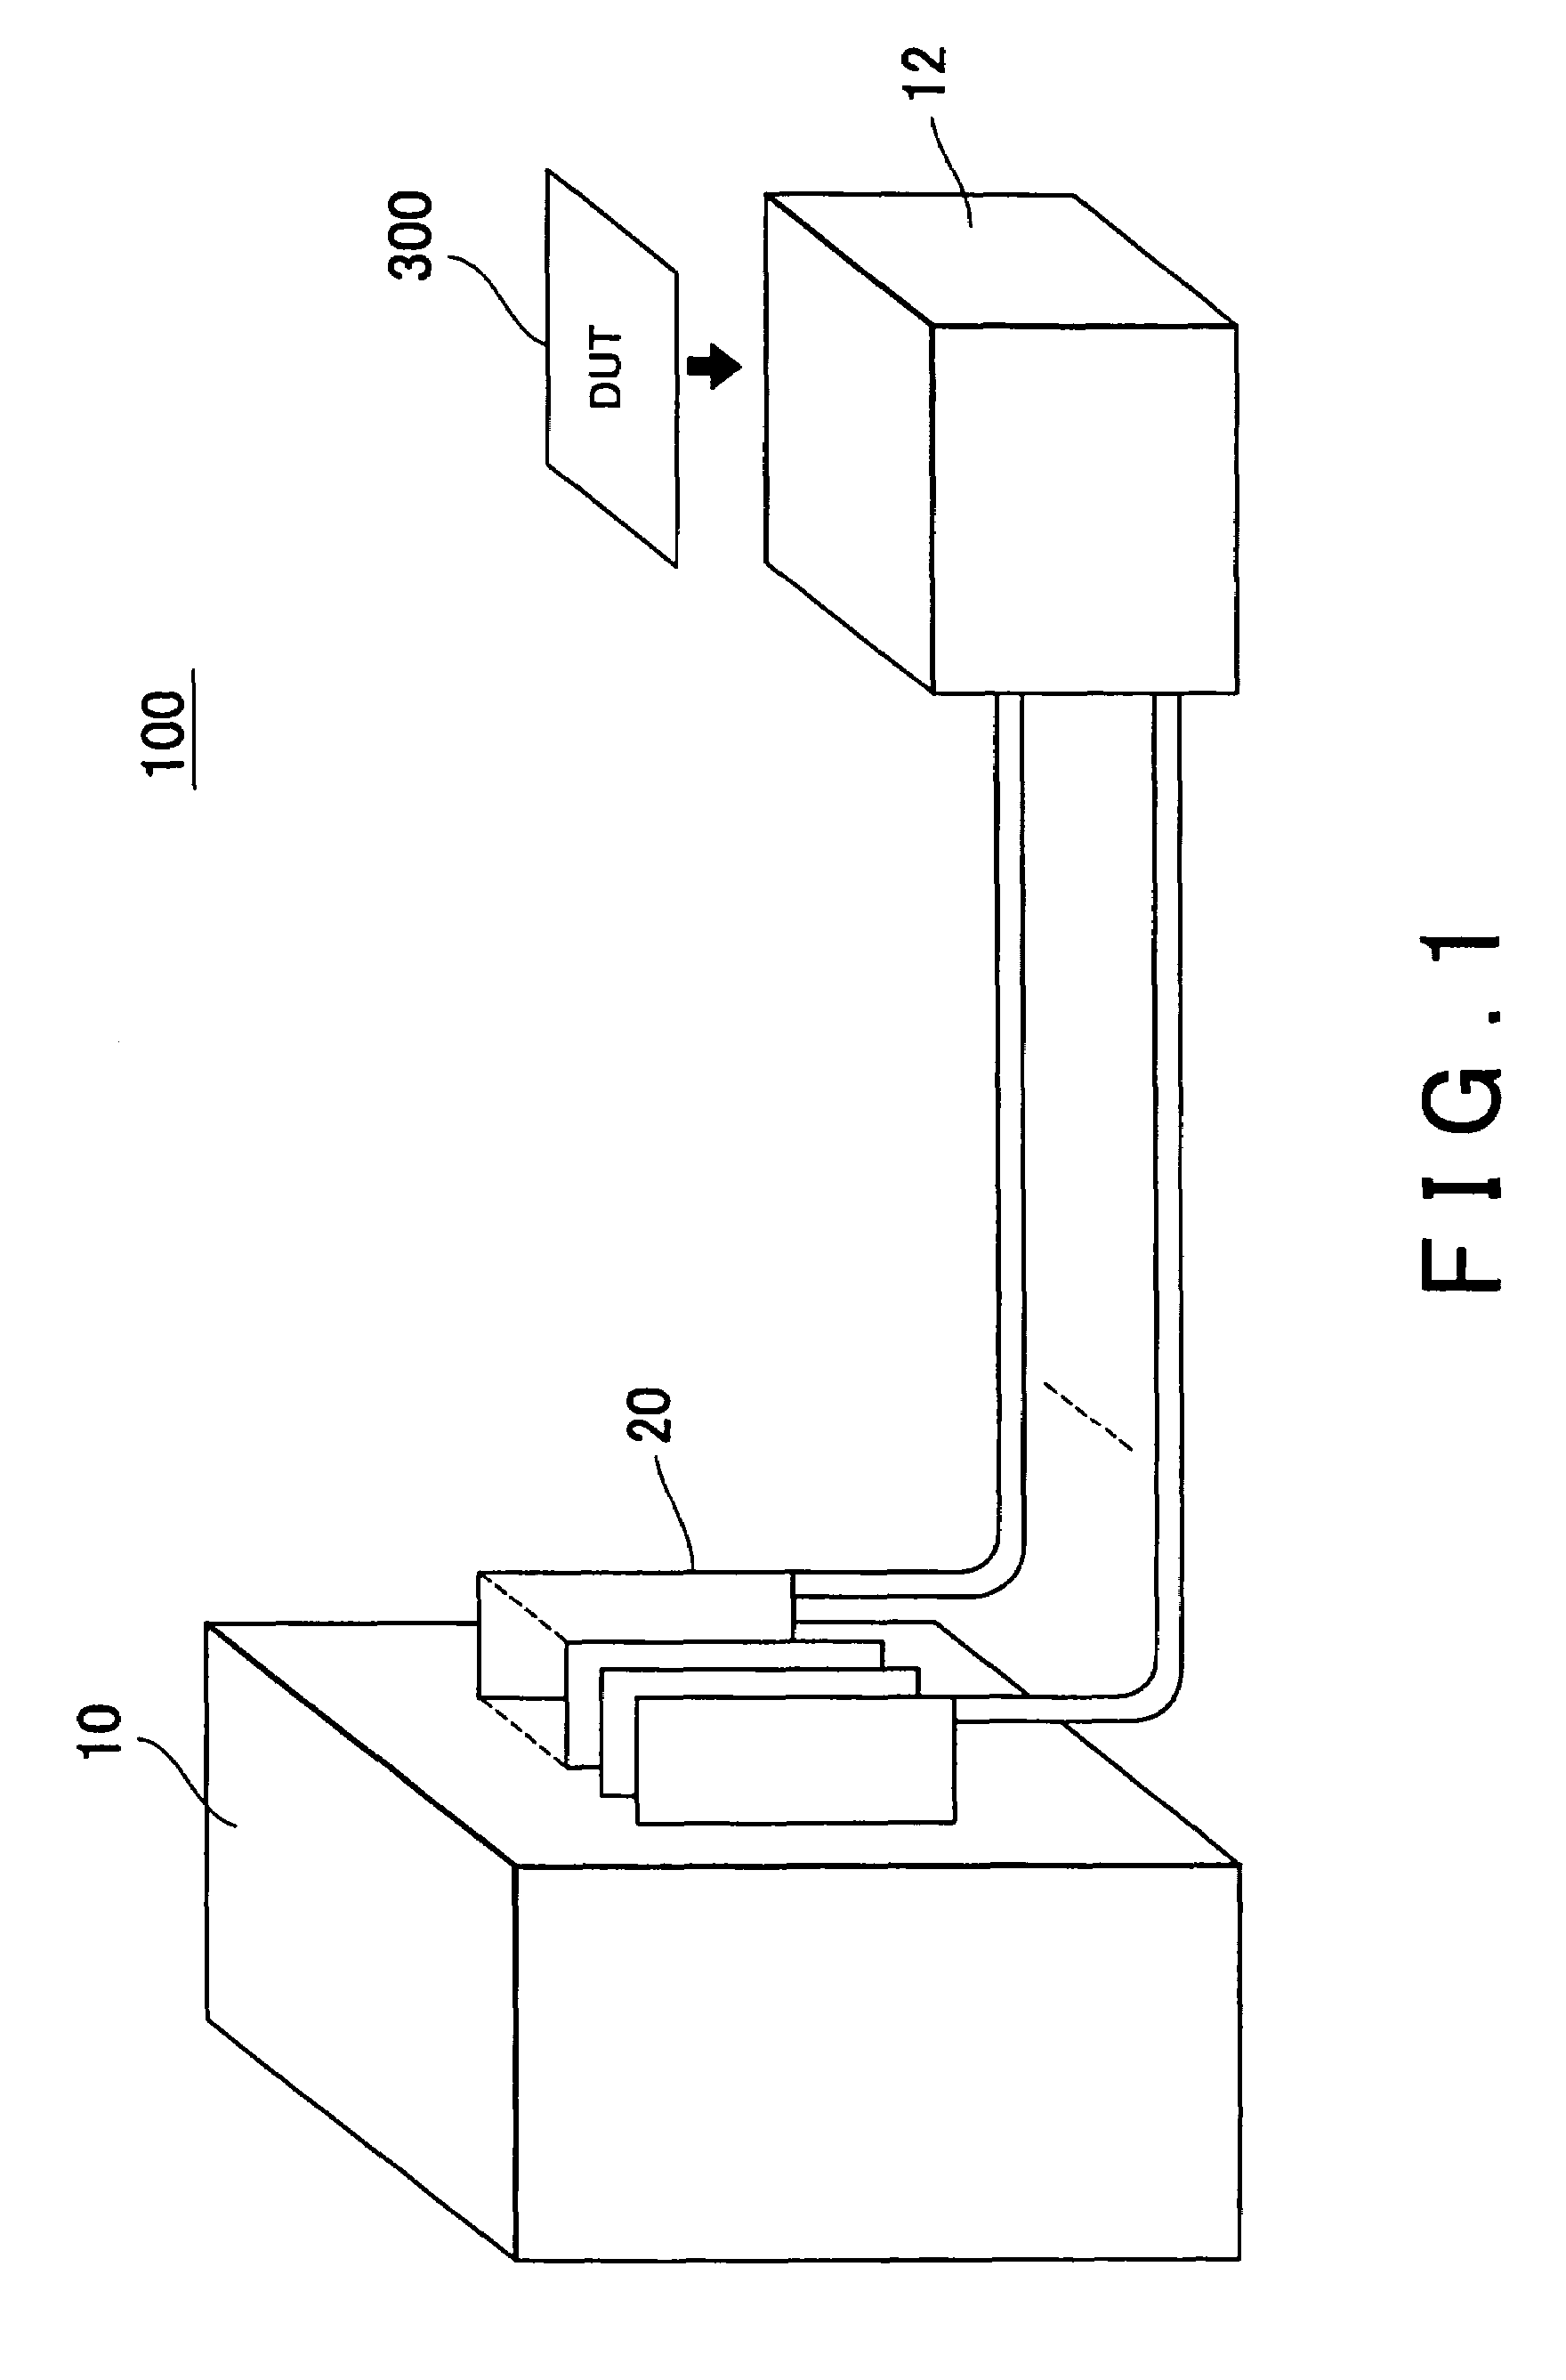 Electronic device test apparatus with optical cables